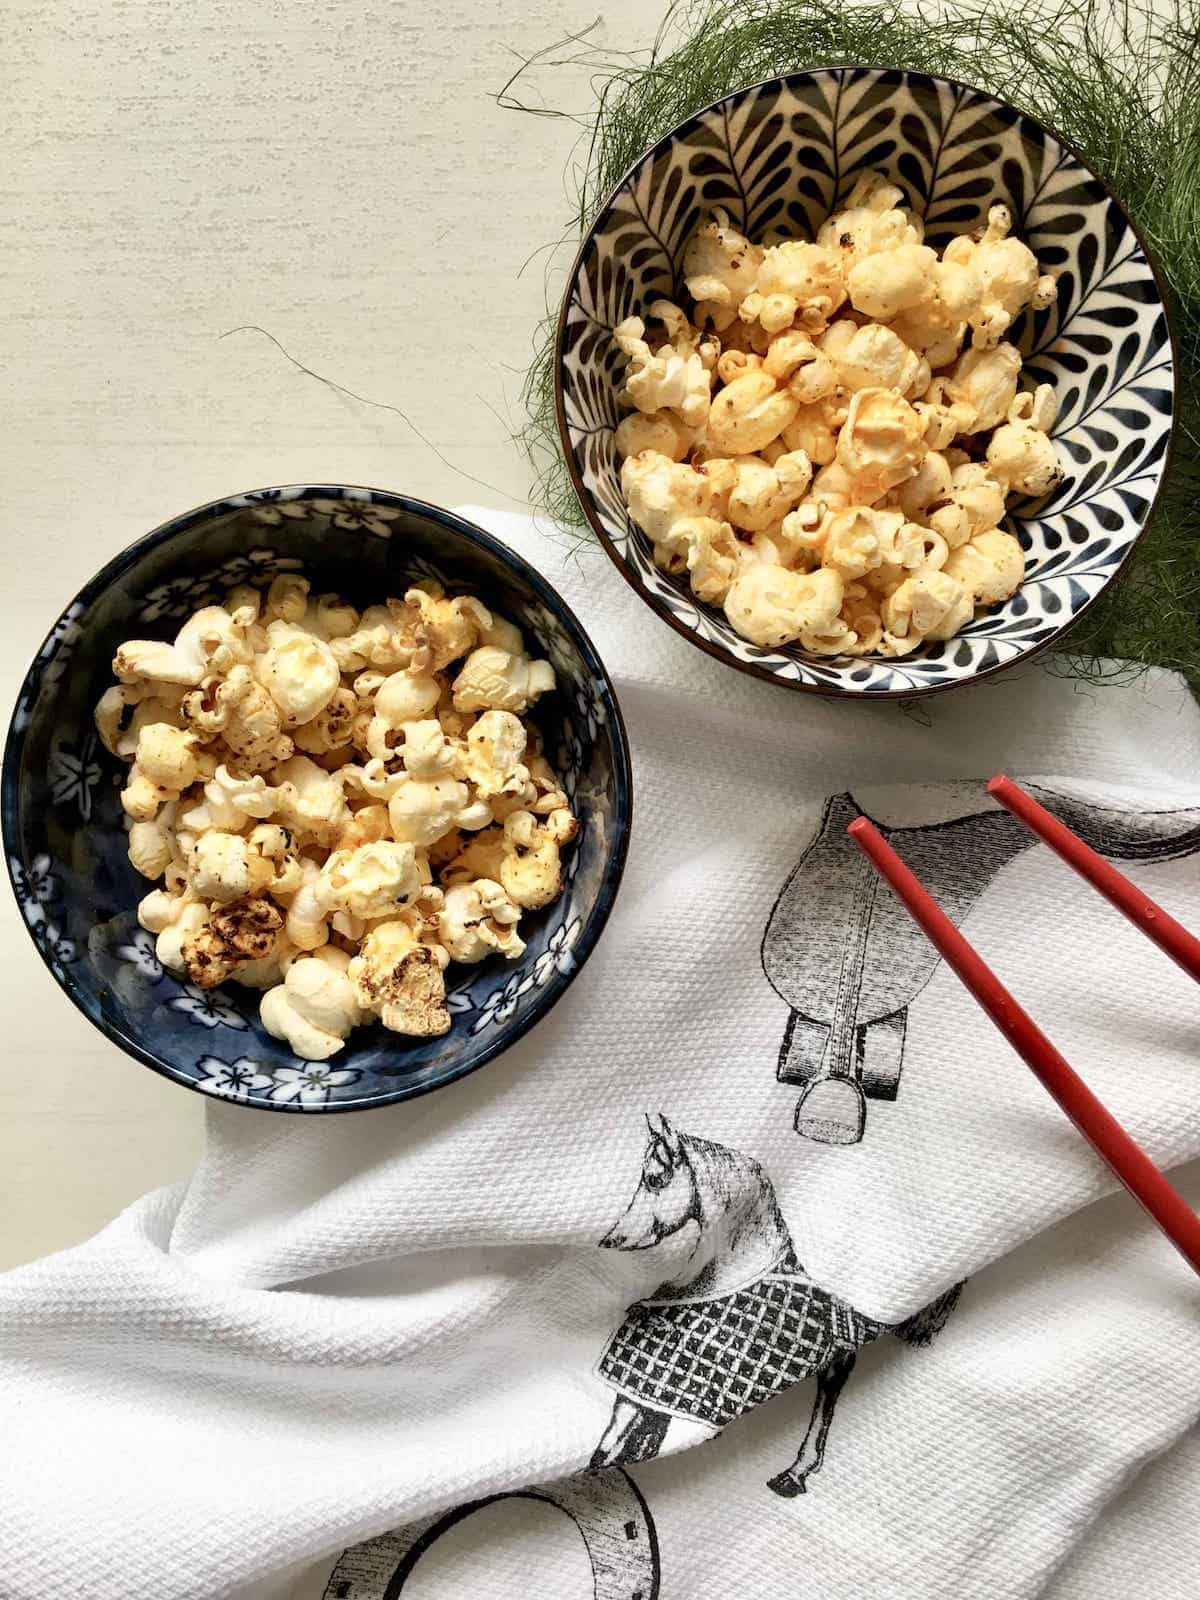 2 bowls of spicy popcorn, 1 with sugar and chilli crisp added to make sweet and spicy popcorn